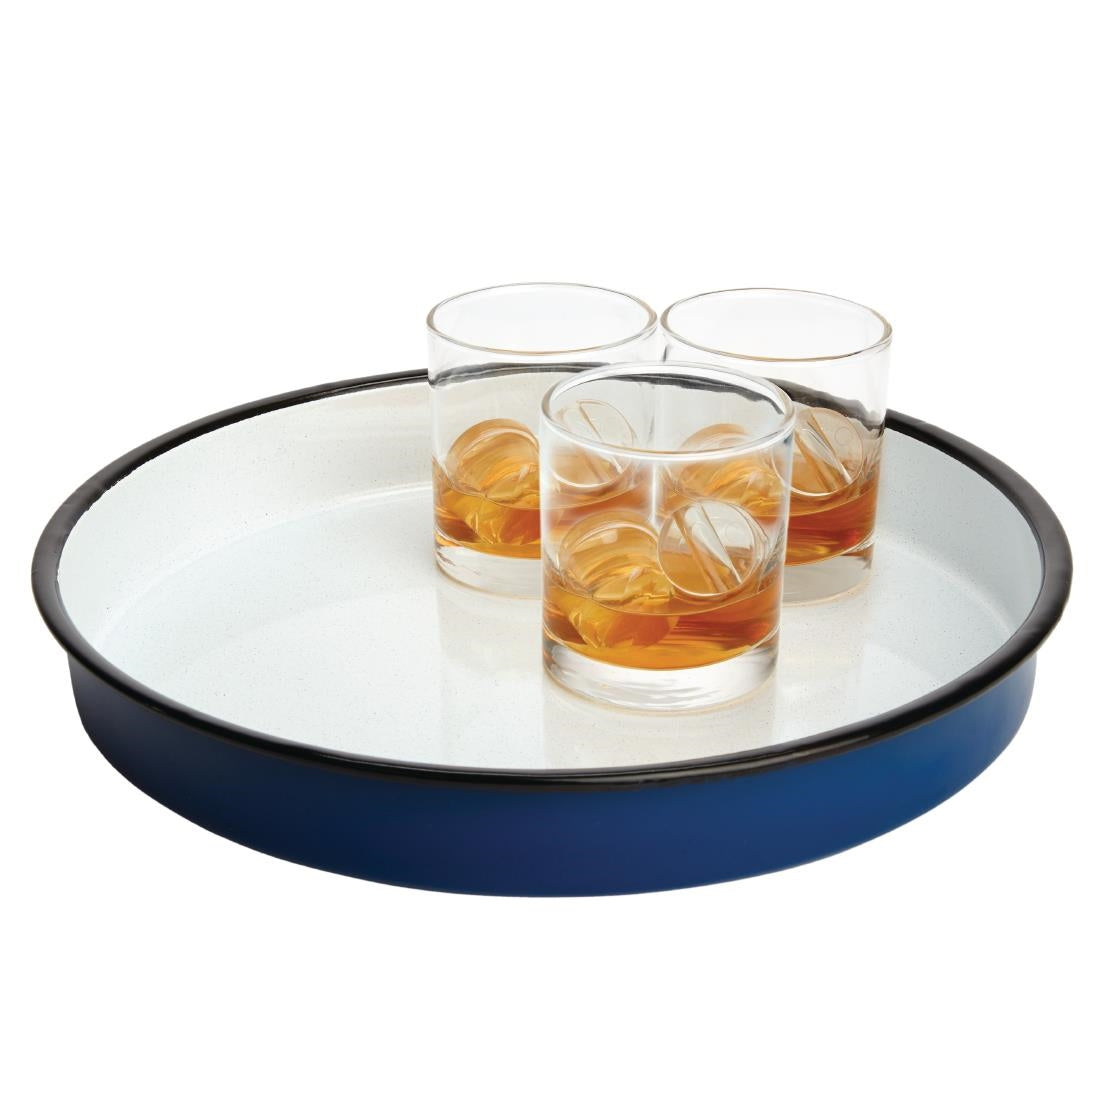 GM240 Olympia Enameled Steel Round Service Tray 320mm JD Catering Equipment Solutions Ltd